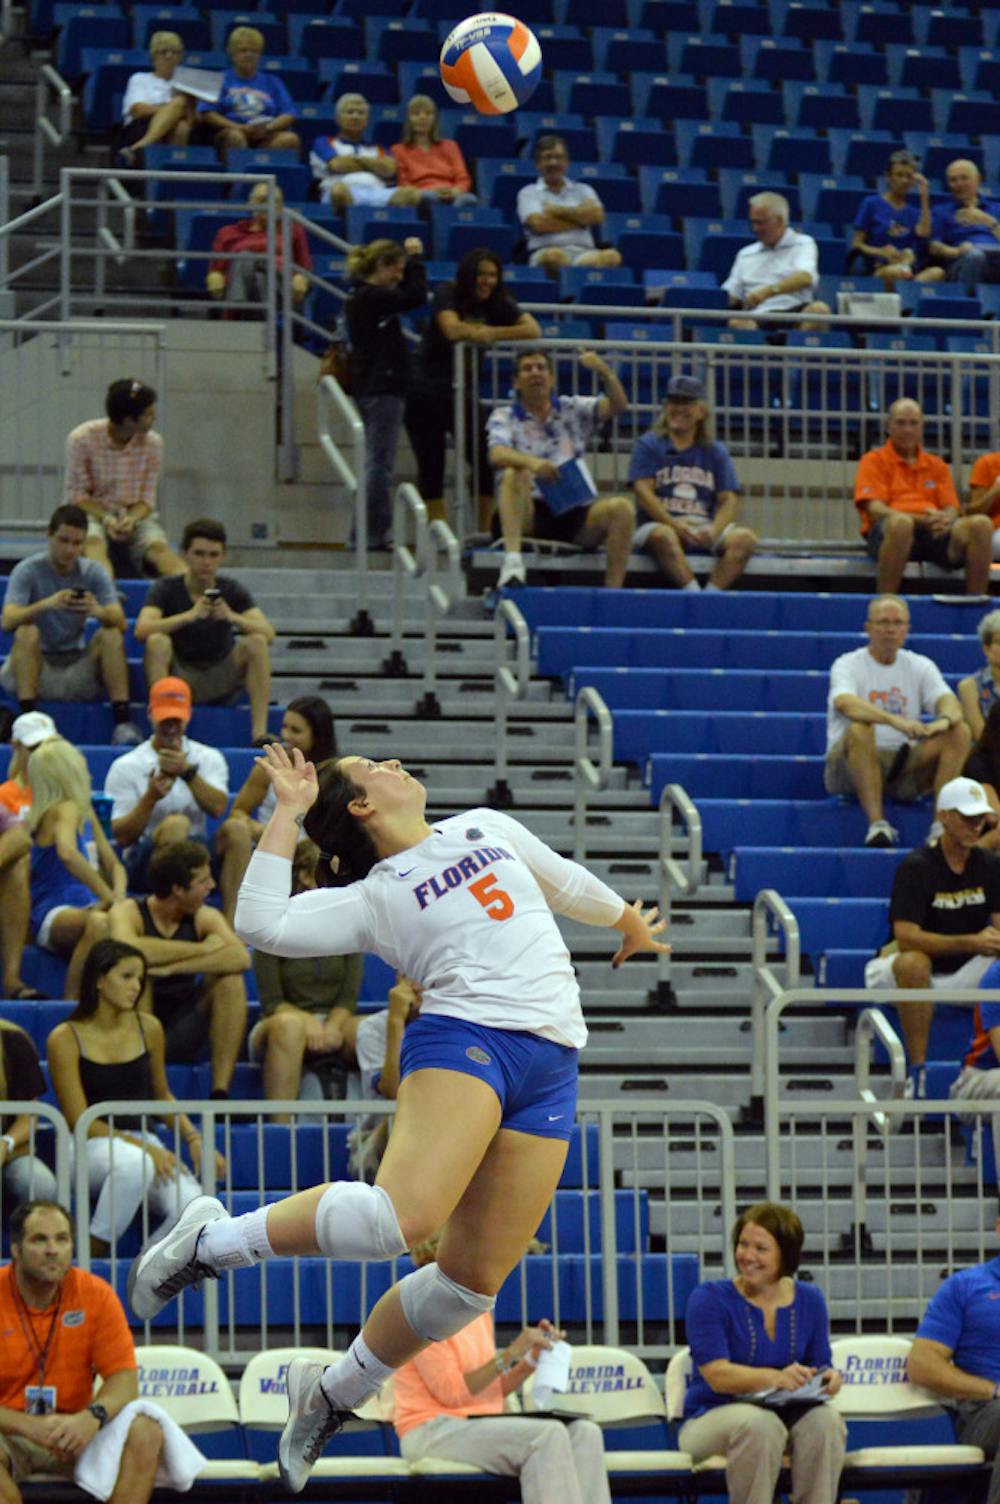 <p>Taylor Unroe jumps to serve the ball during Florida's 3-0 win against Georgia Southern on Friday in the O'Connell Center.</p>